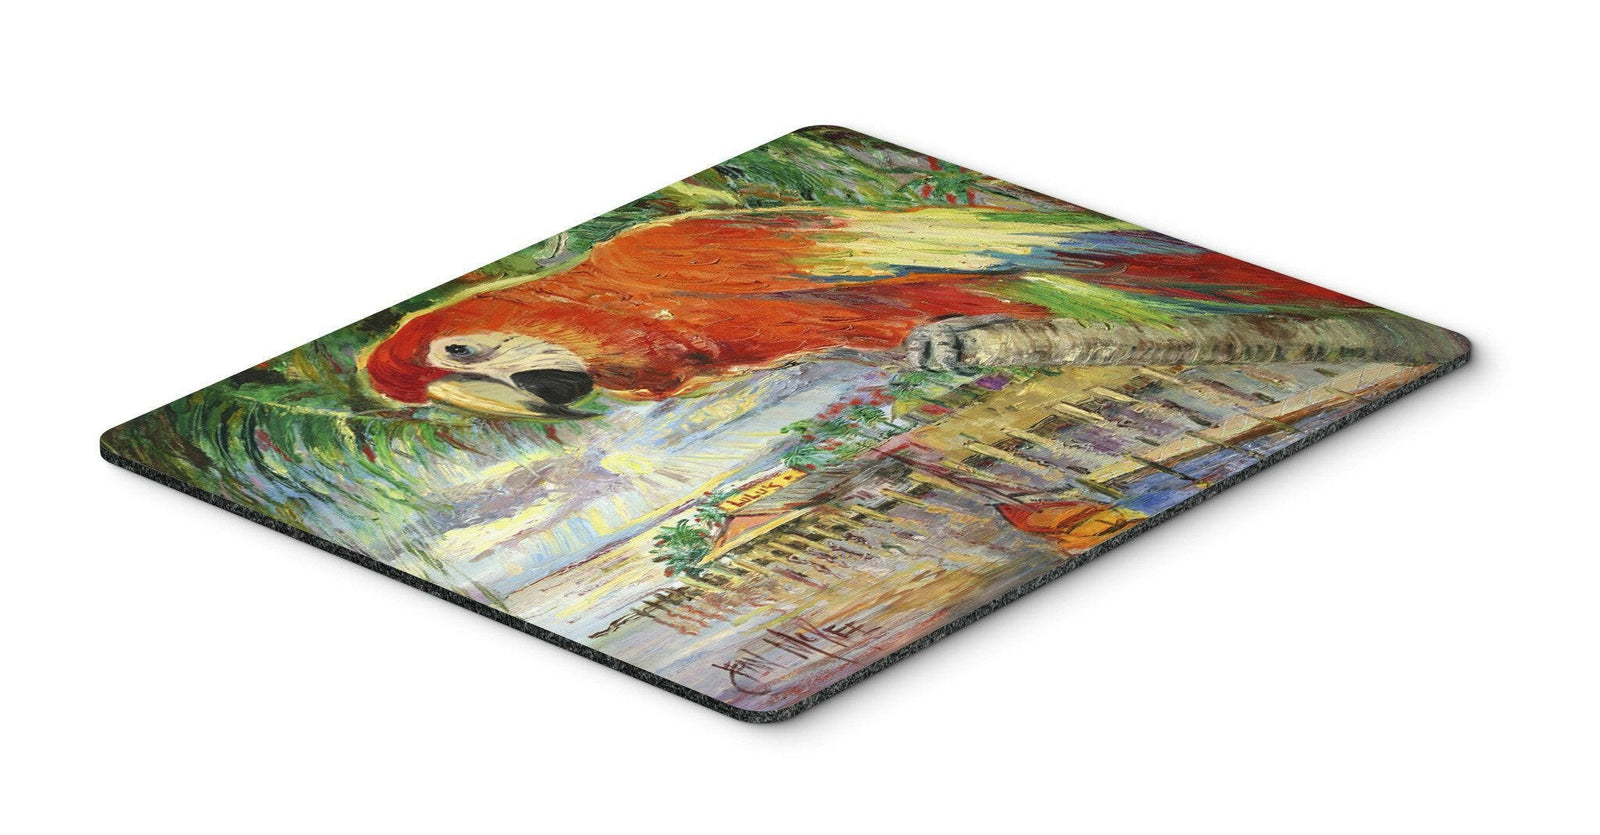 Red Parrot at Lulu's Mouse Pad, Hot Pad or Trivet JMK1134MP by Caroline's Treasures